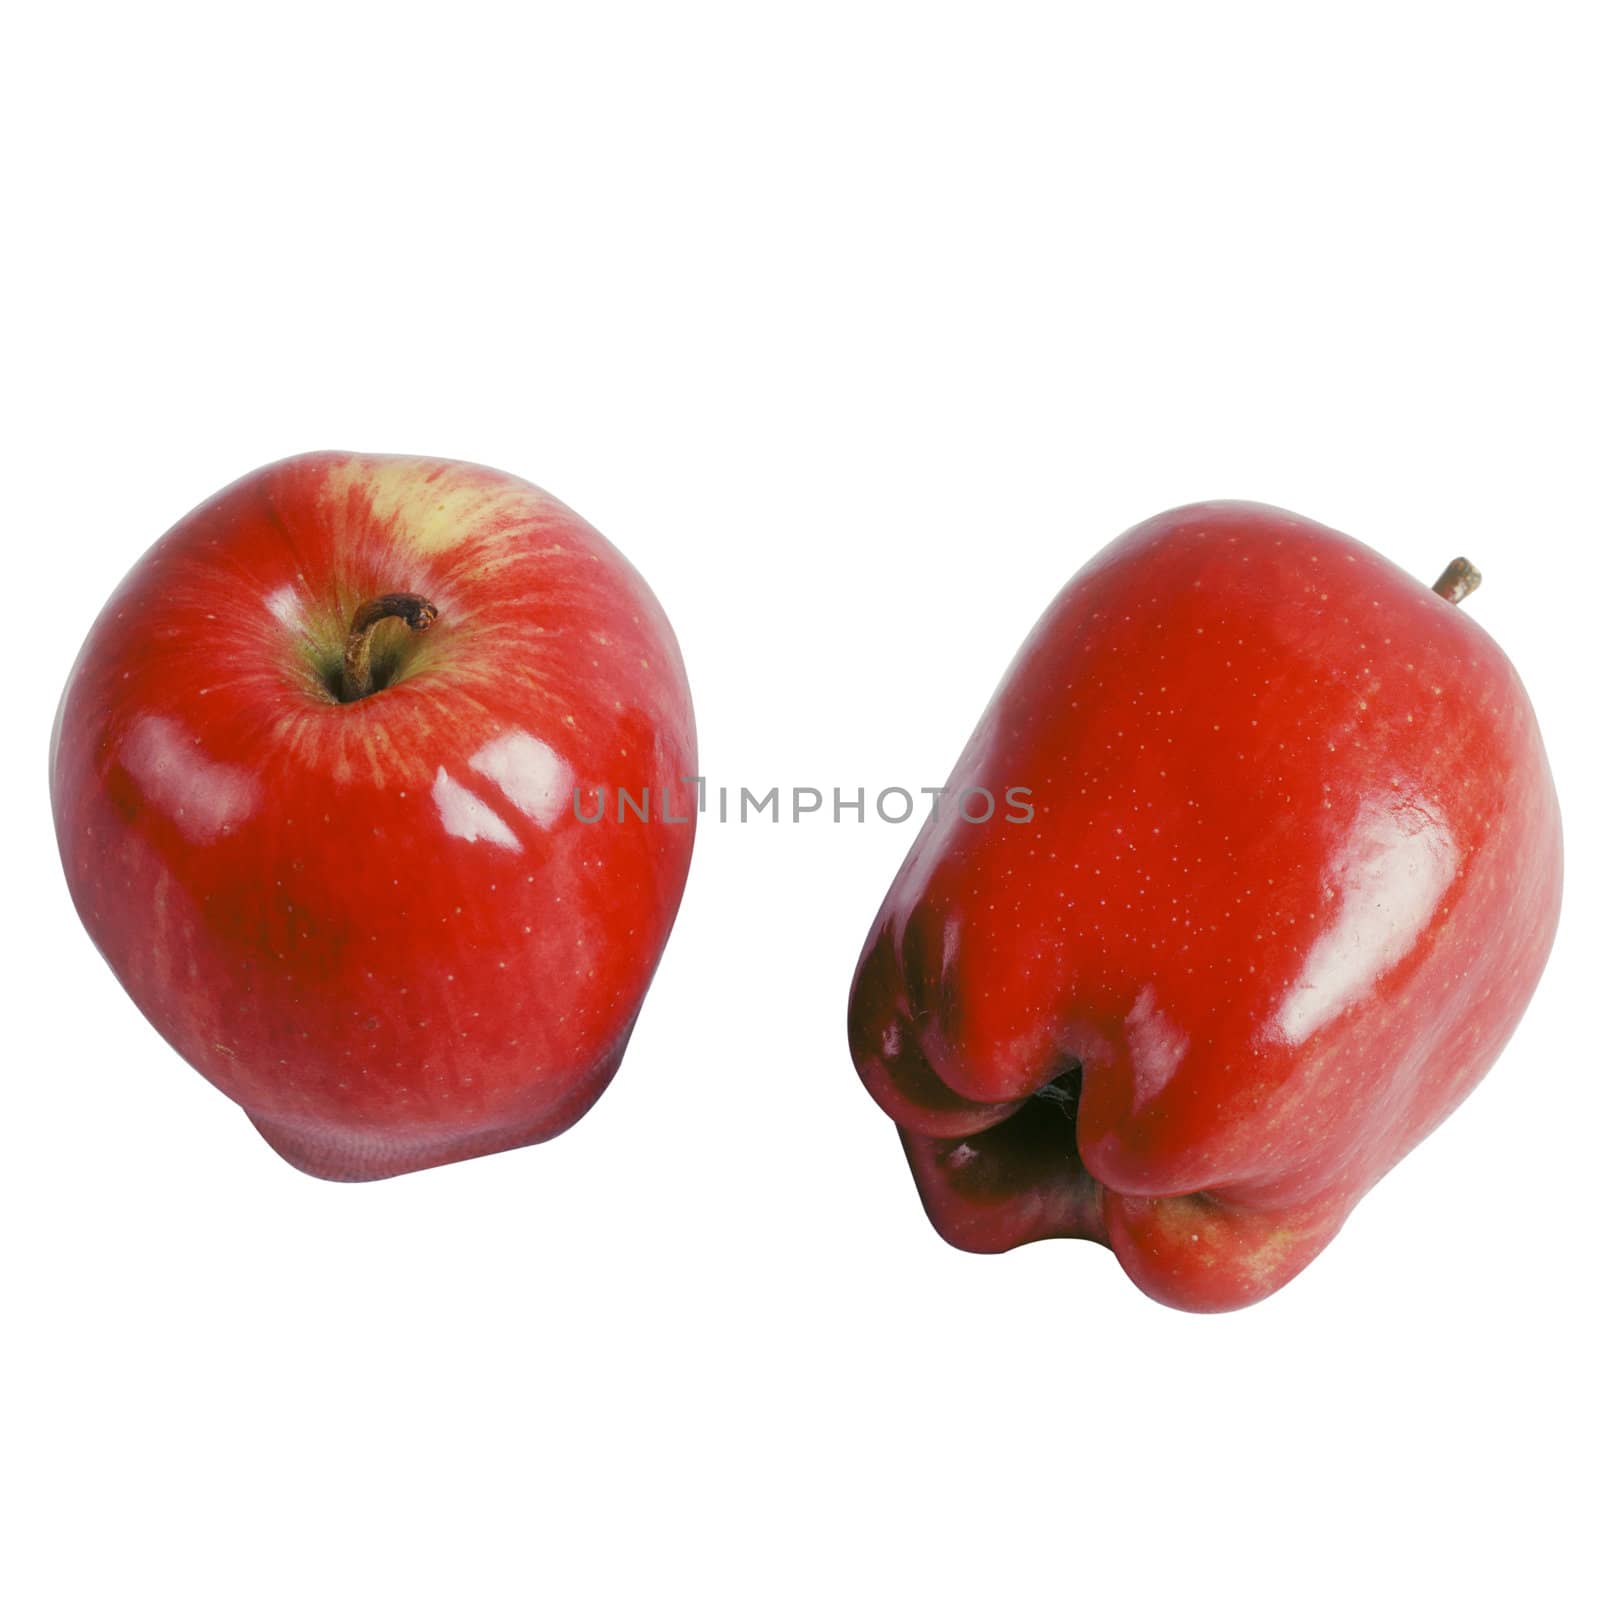 Two red apples by Baltus